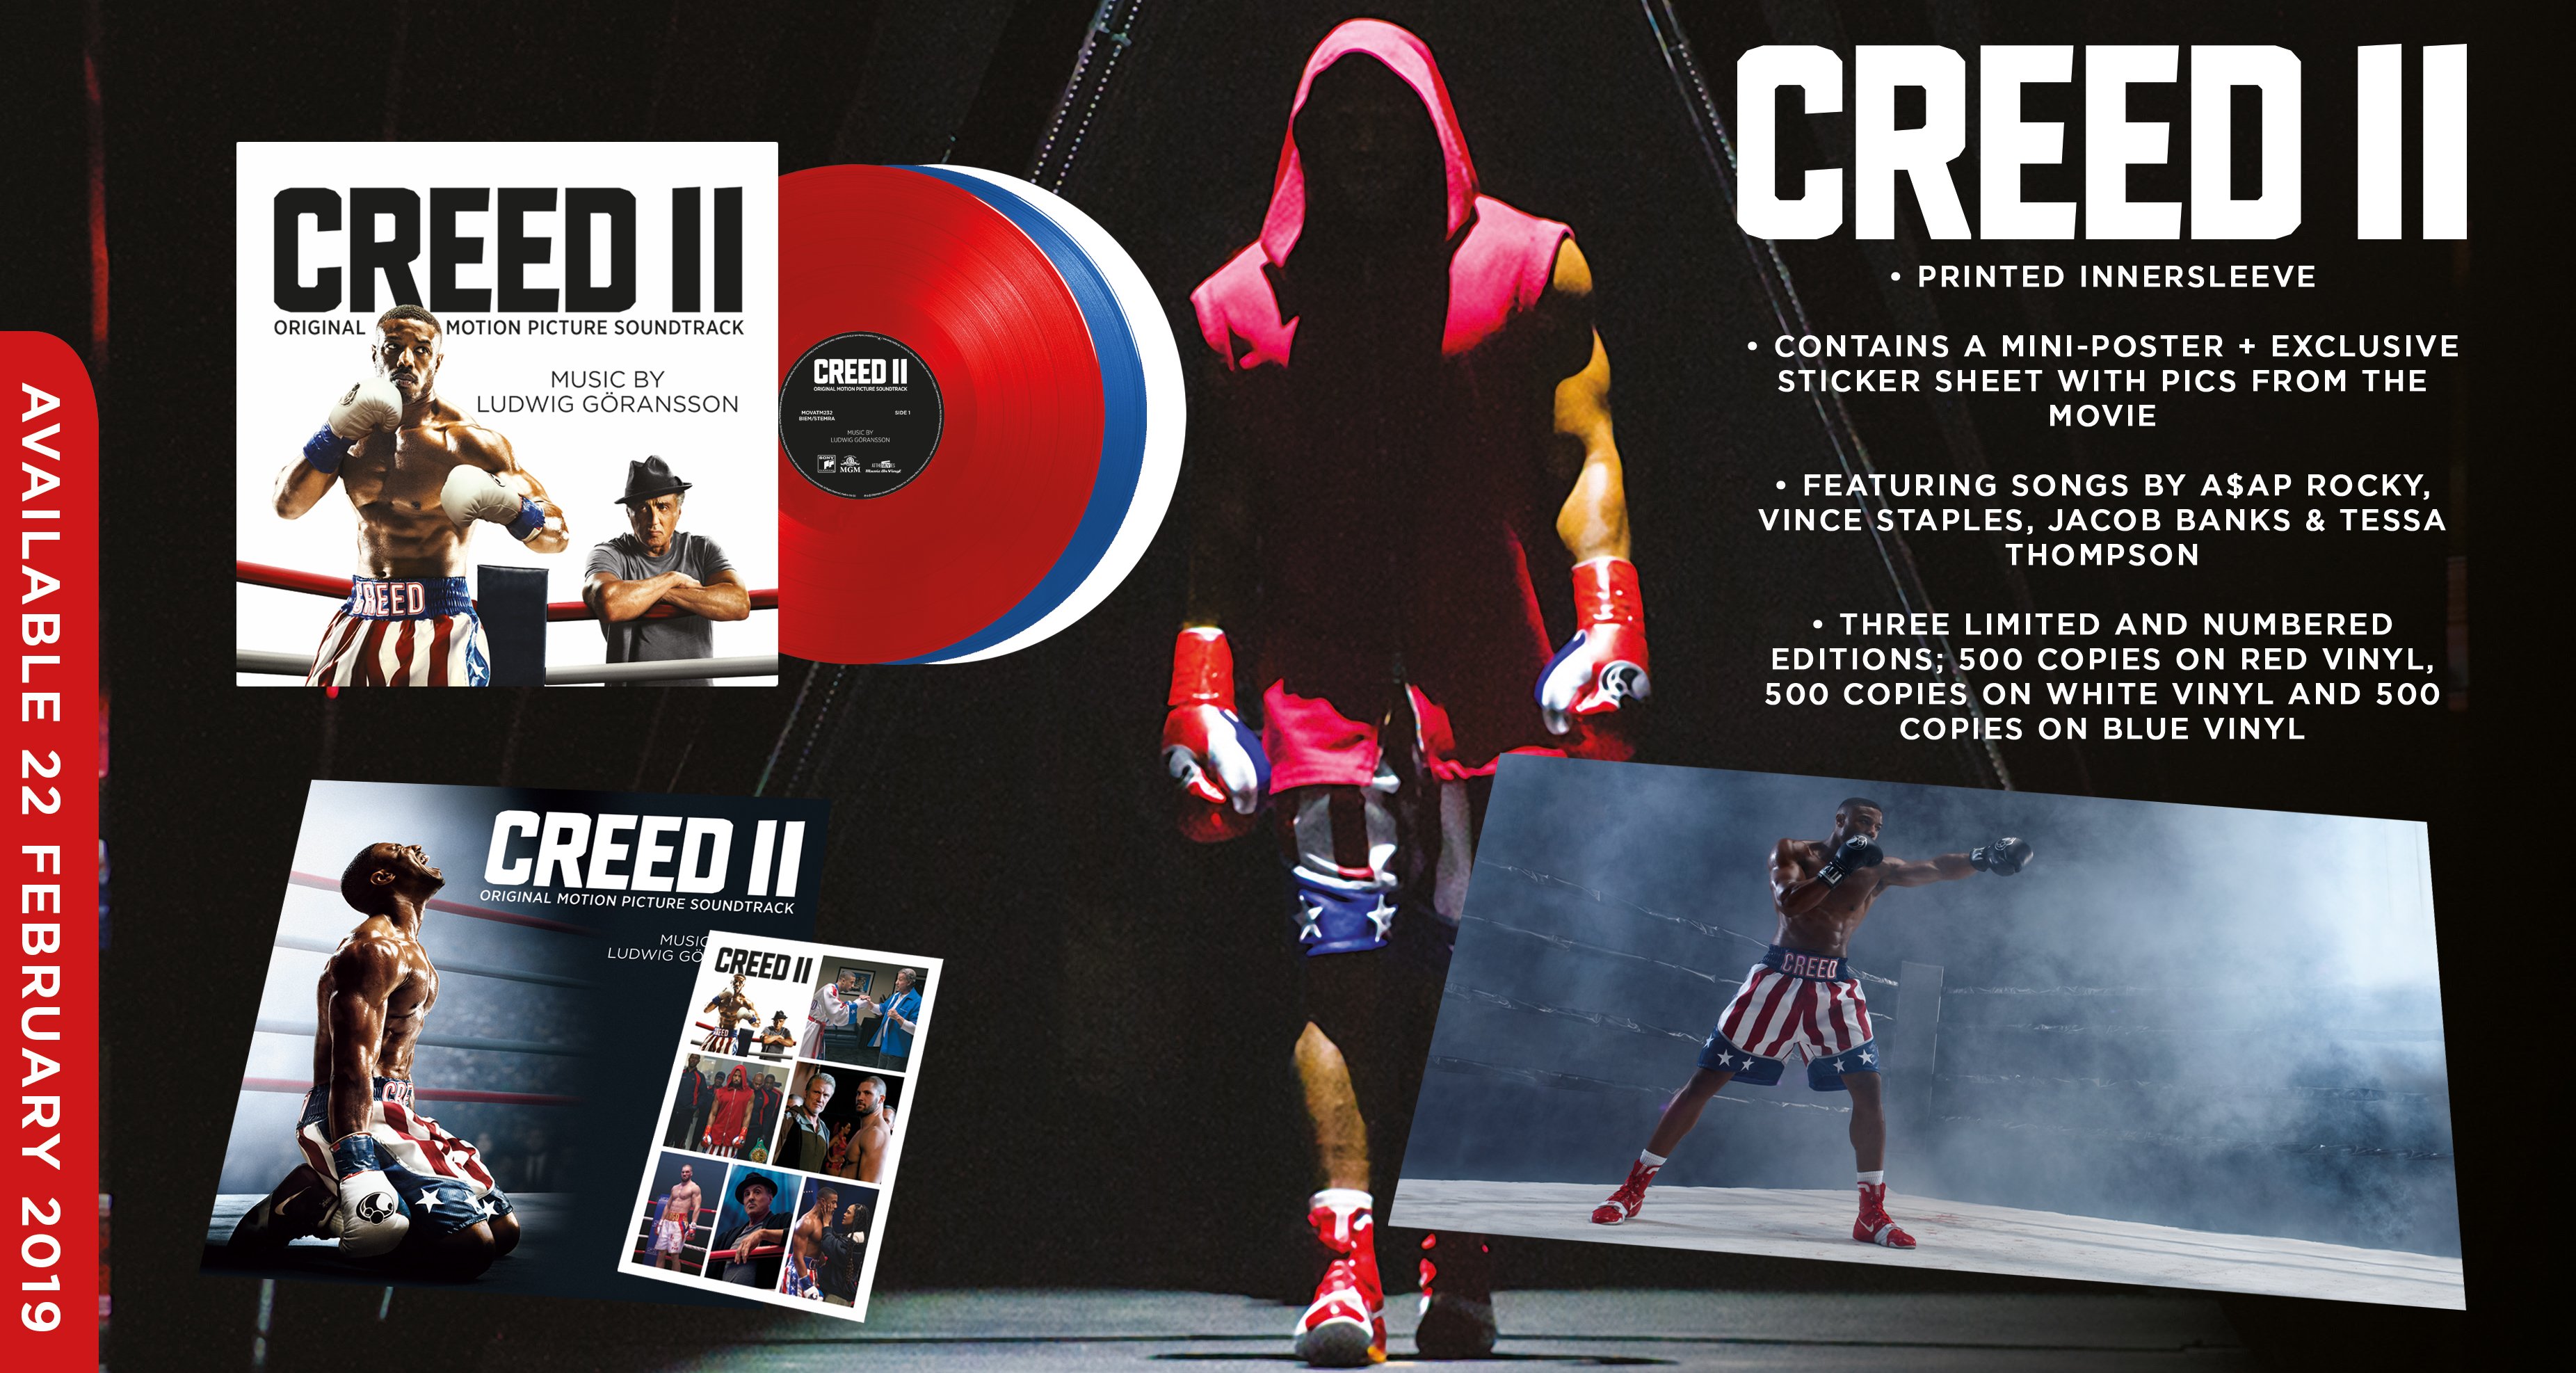 Creed soundtrack. Крид 2 2018. Creed 2 Soundtrack. ASAP Rocky и Крид. Johnson Creed.